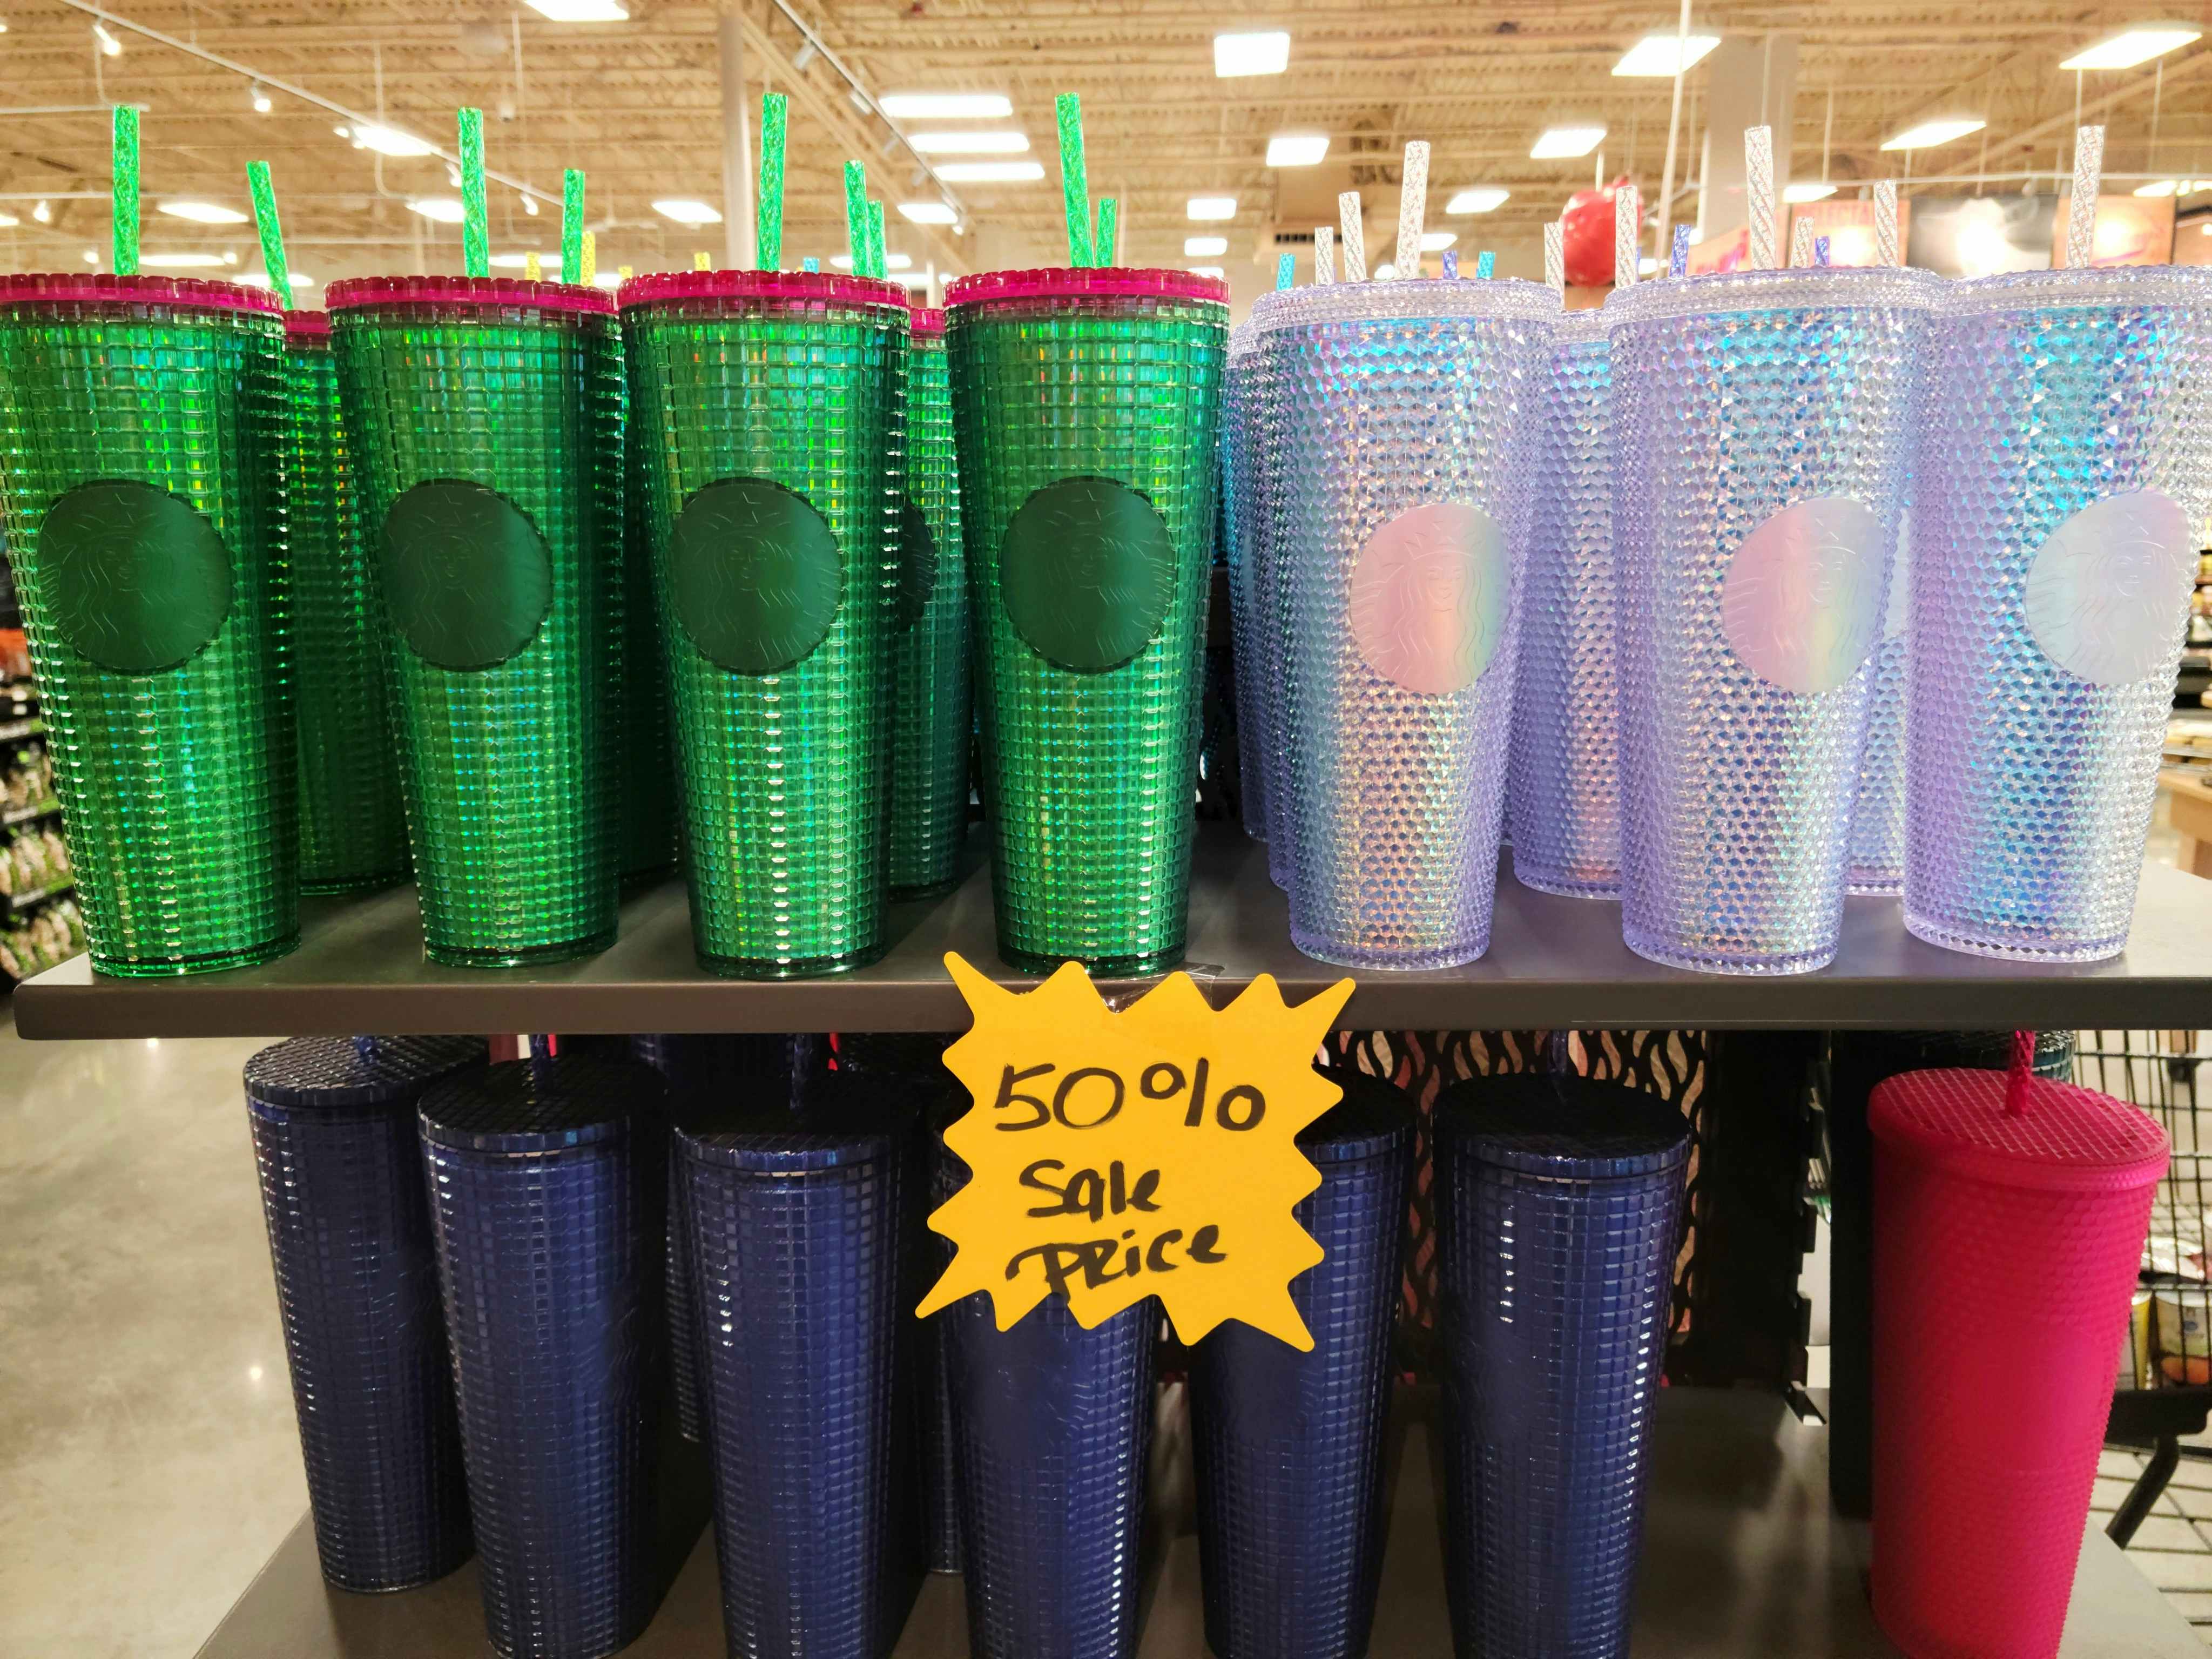 Starbucks Fall Cup Collection Is Showing Up In Stores. Here's A